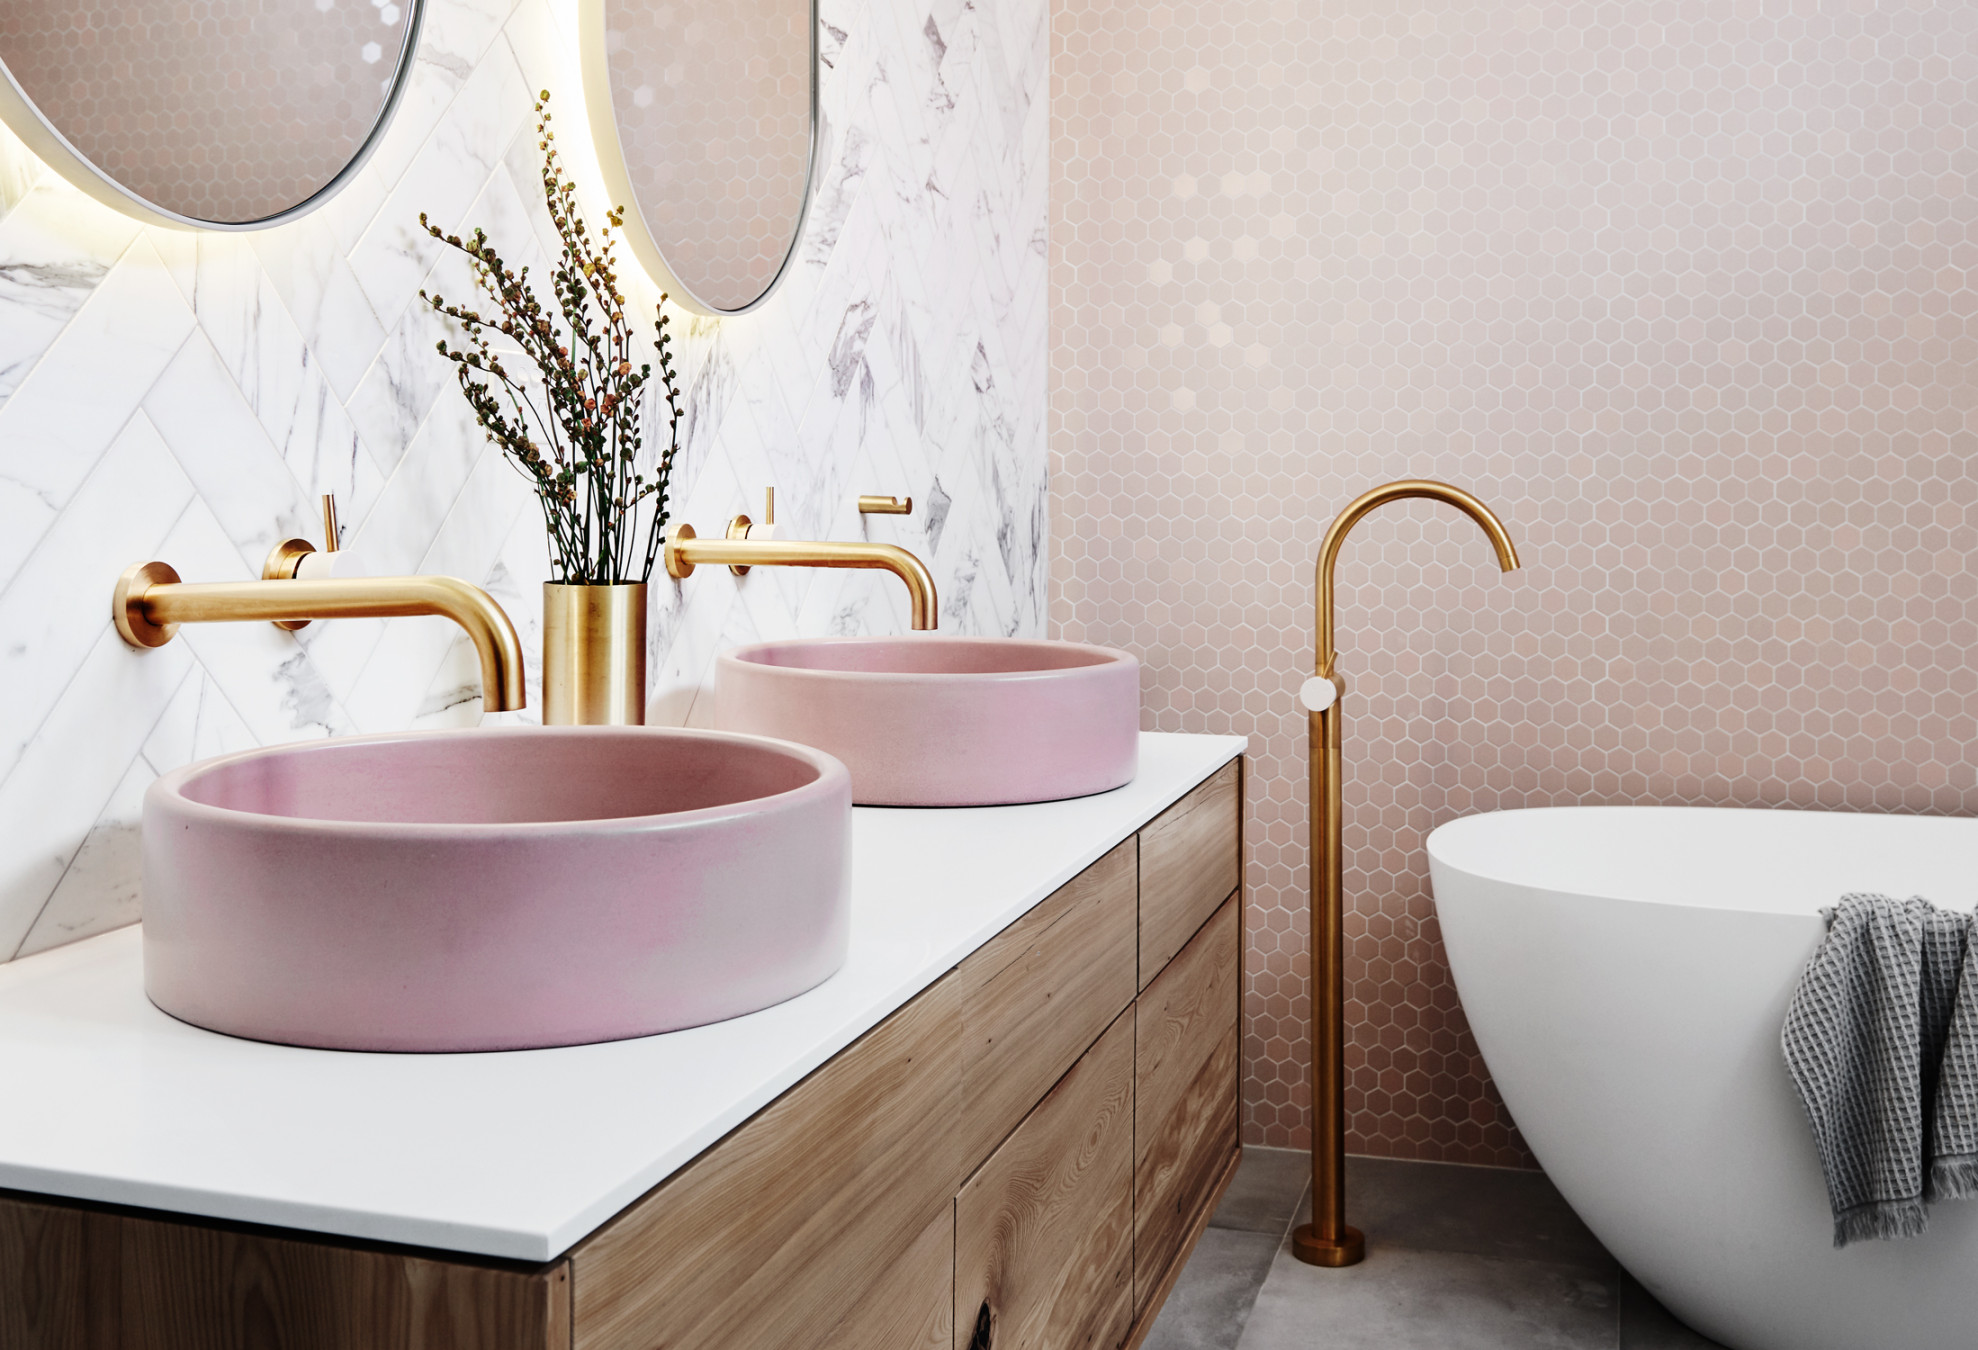 Colourful bathrooms:  ideas that are everything but monochrome